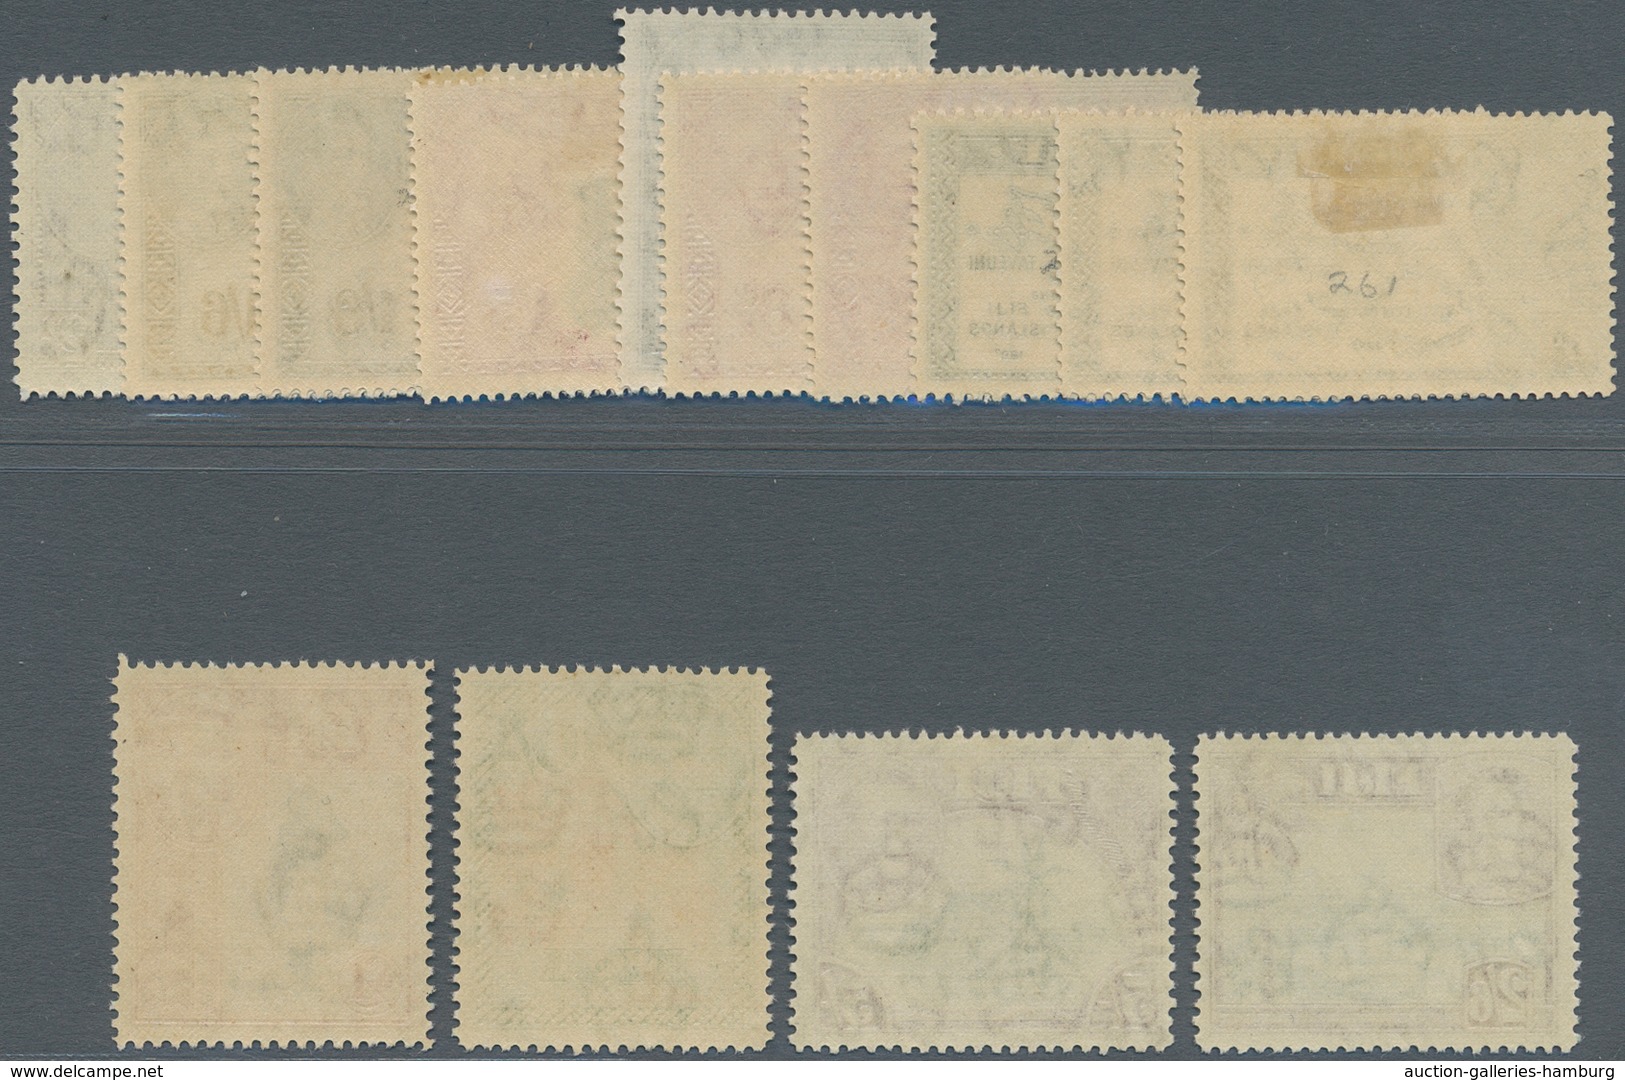 Fiji-Inseln: 1938/1955, KGVI Pictorial Definitives Complete Set Of 22 And Additional Perforations/sh - Fidschi-Inseln (...-1970)